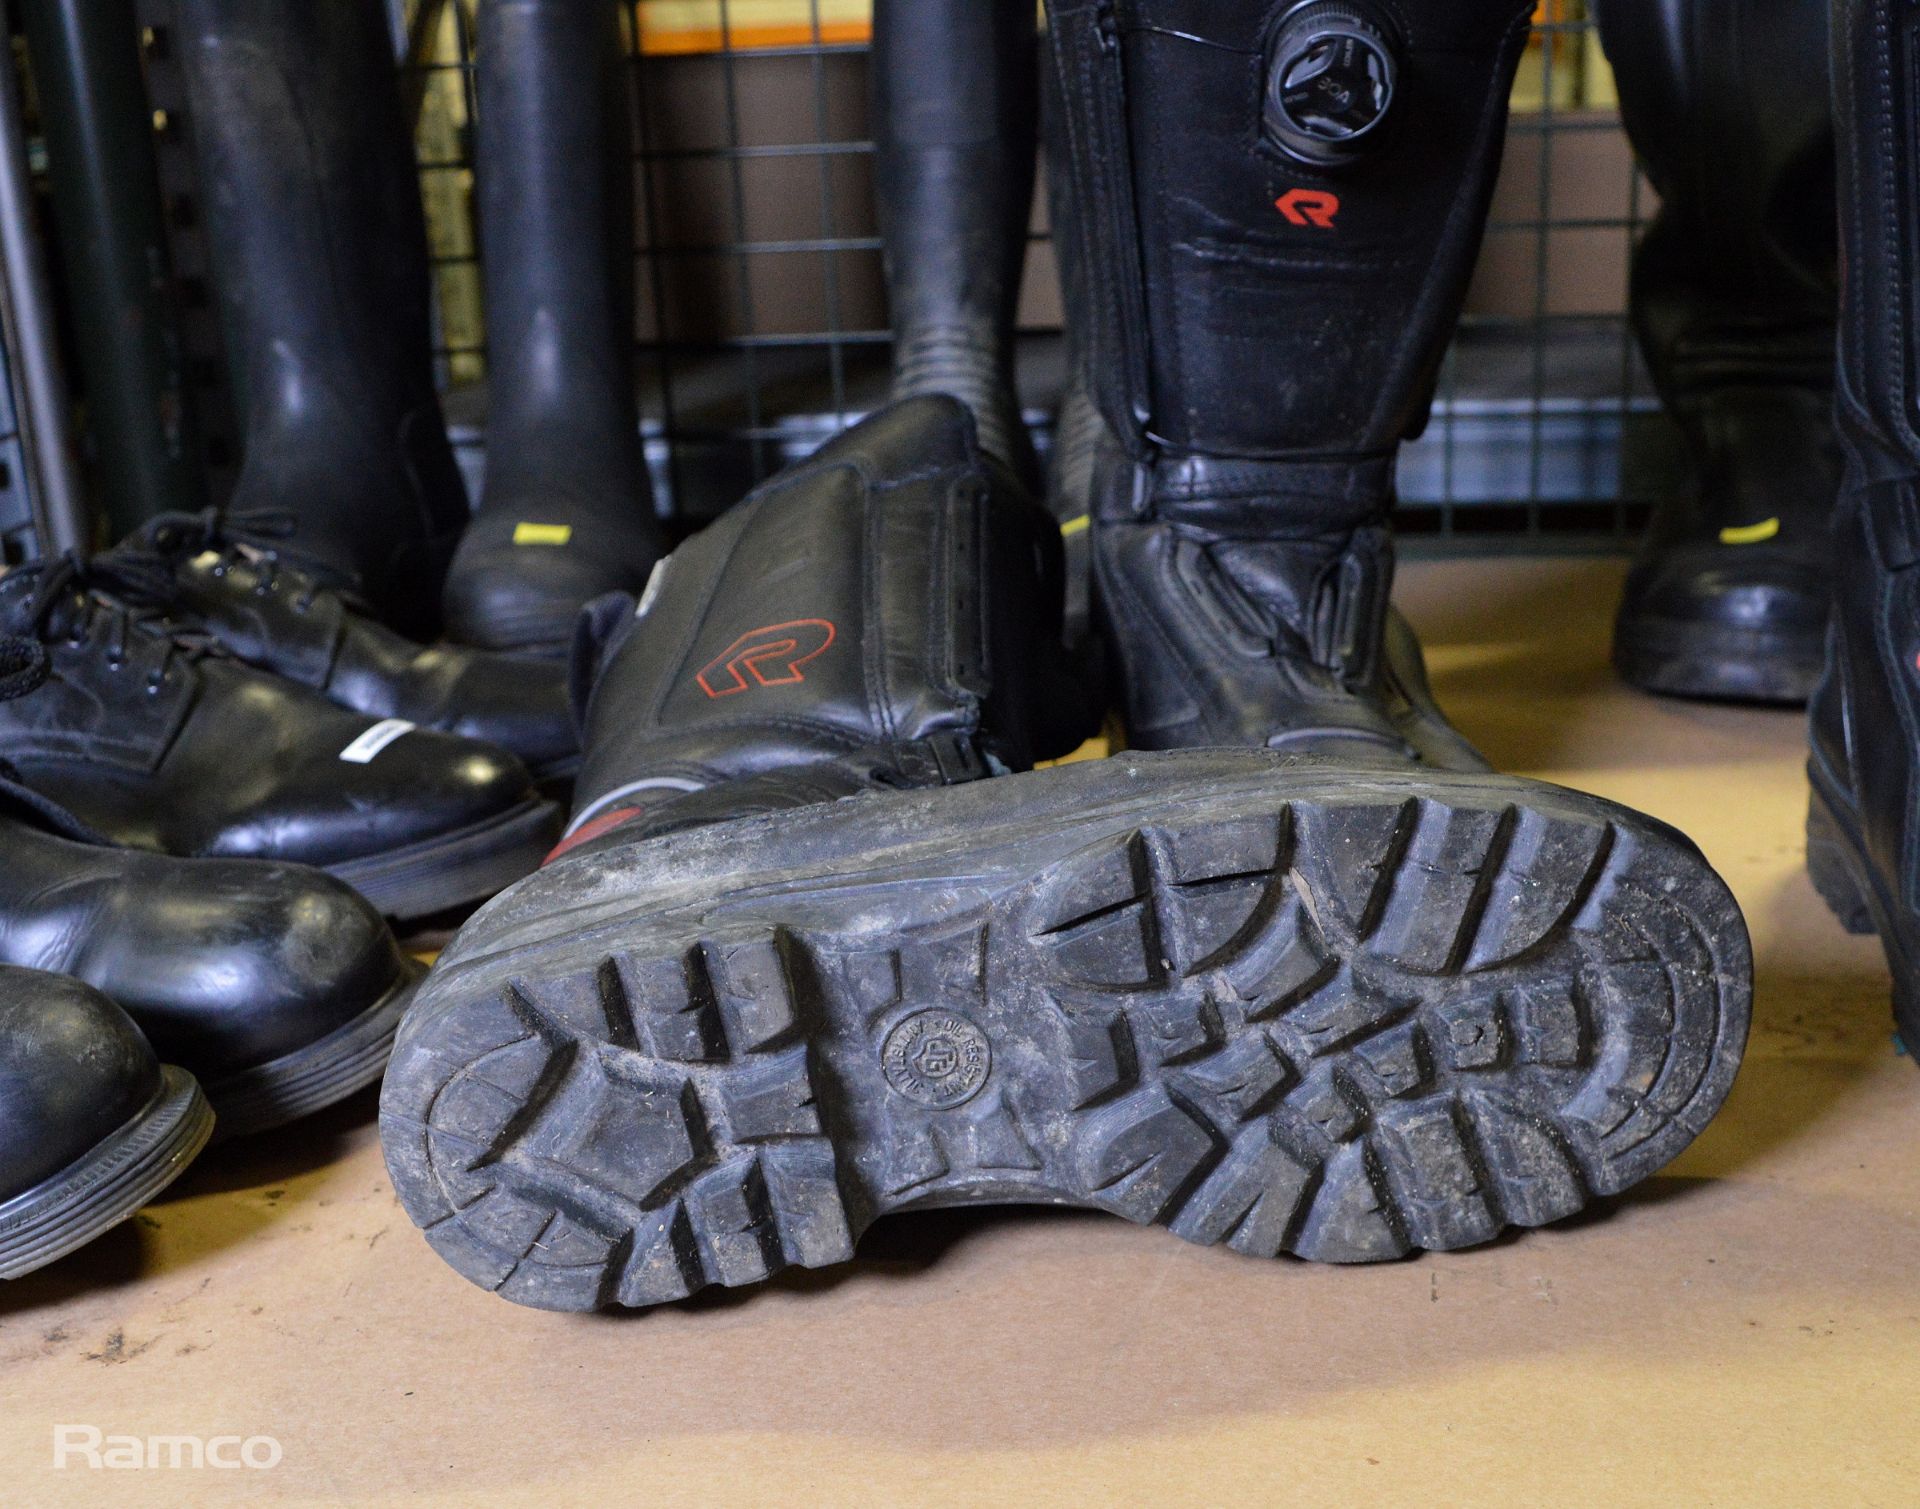 3x Pairs of Leather Boots, 2x Pairs of Safety Wellington Boot, 2x Pairs safety shoes - Image 5 of 7